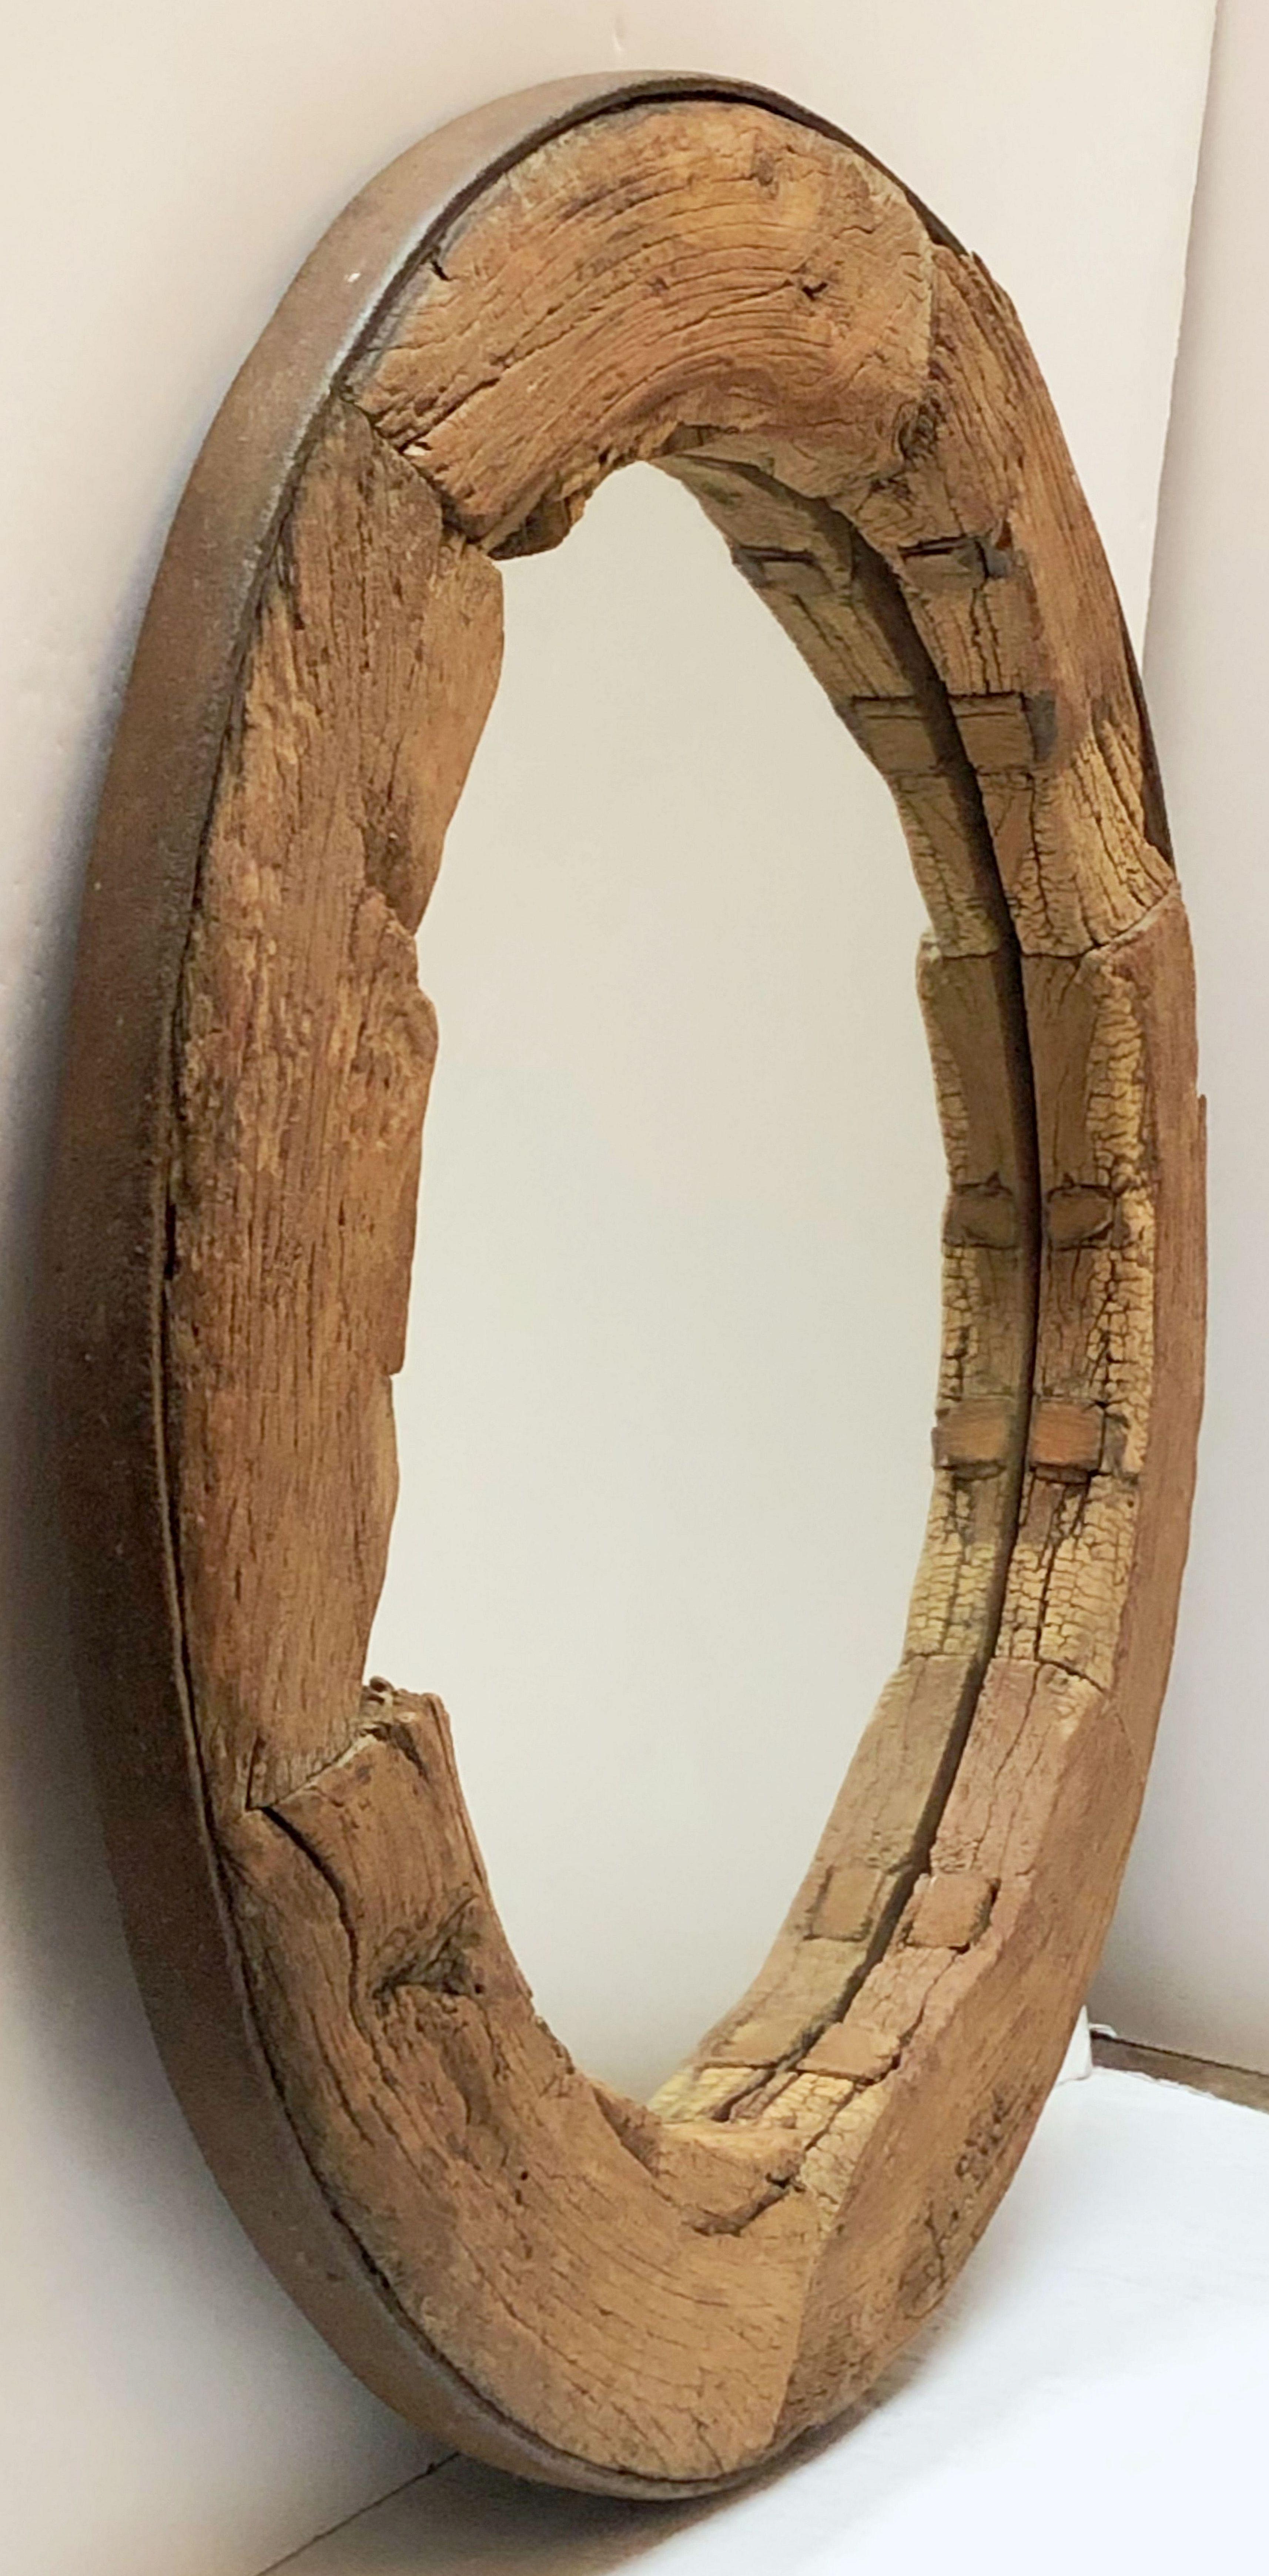 A handsome large rustic or Primitive English round or circular mirror with a frame fashioned from a wagon wheel of iron-bound oak 

Dimensions: Diameter 43 inches x Depth 4 inches